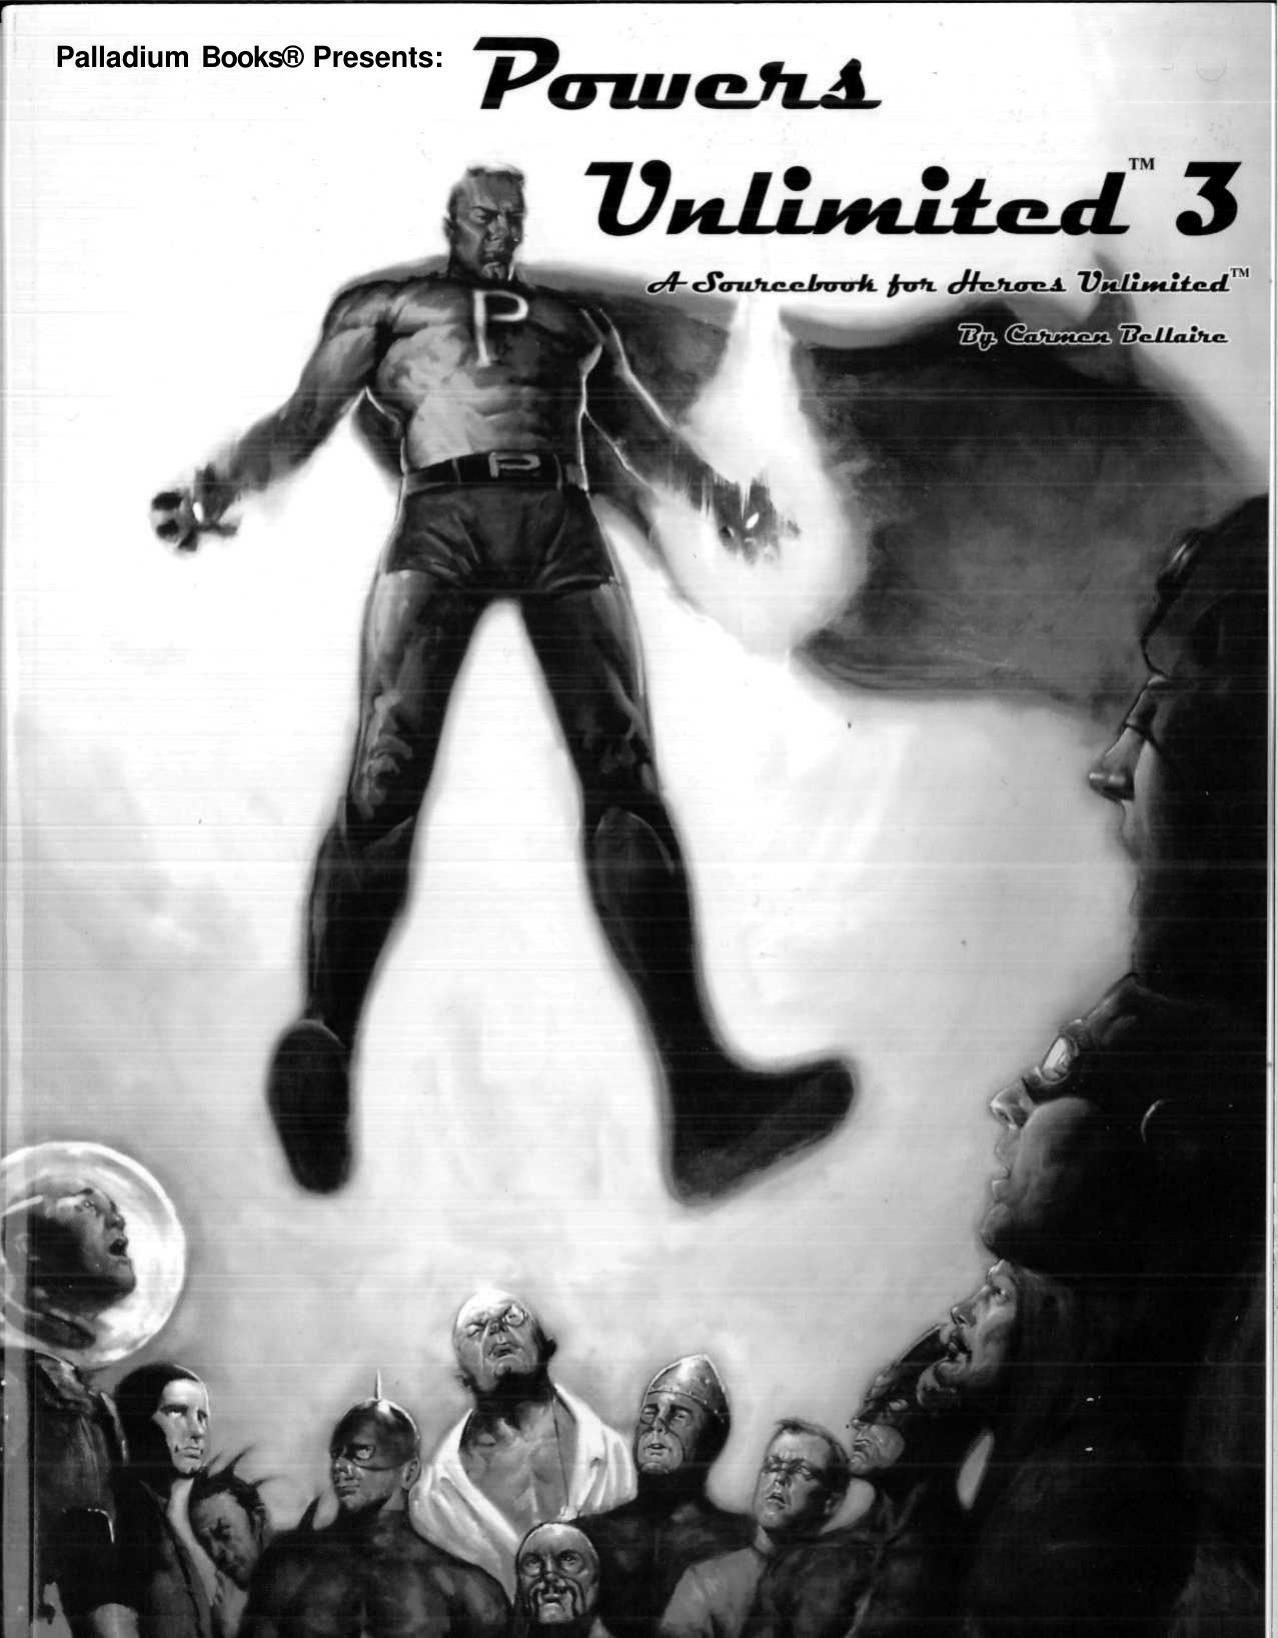 Powers Unlimited 3